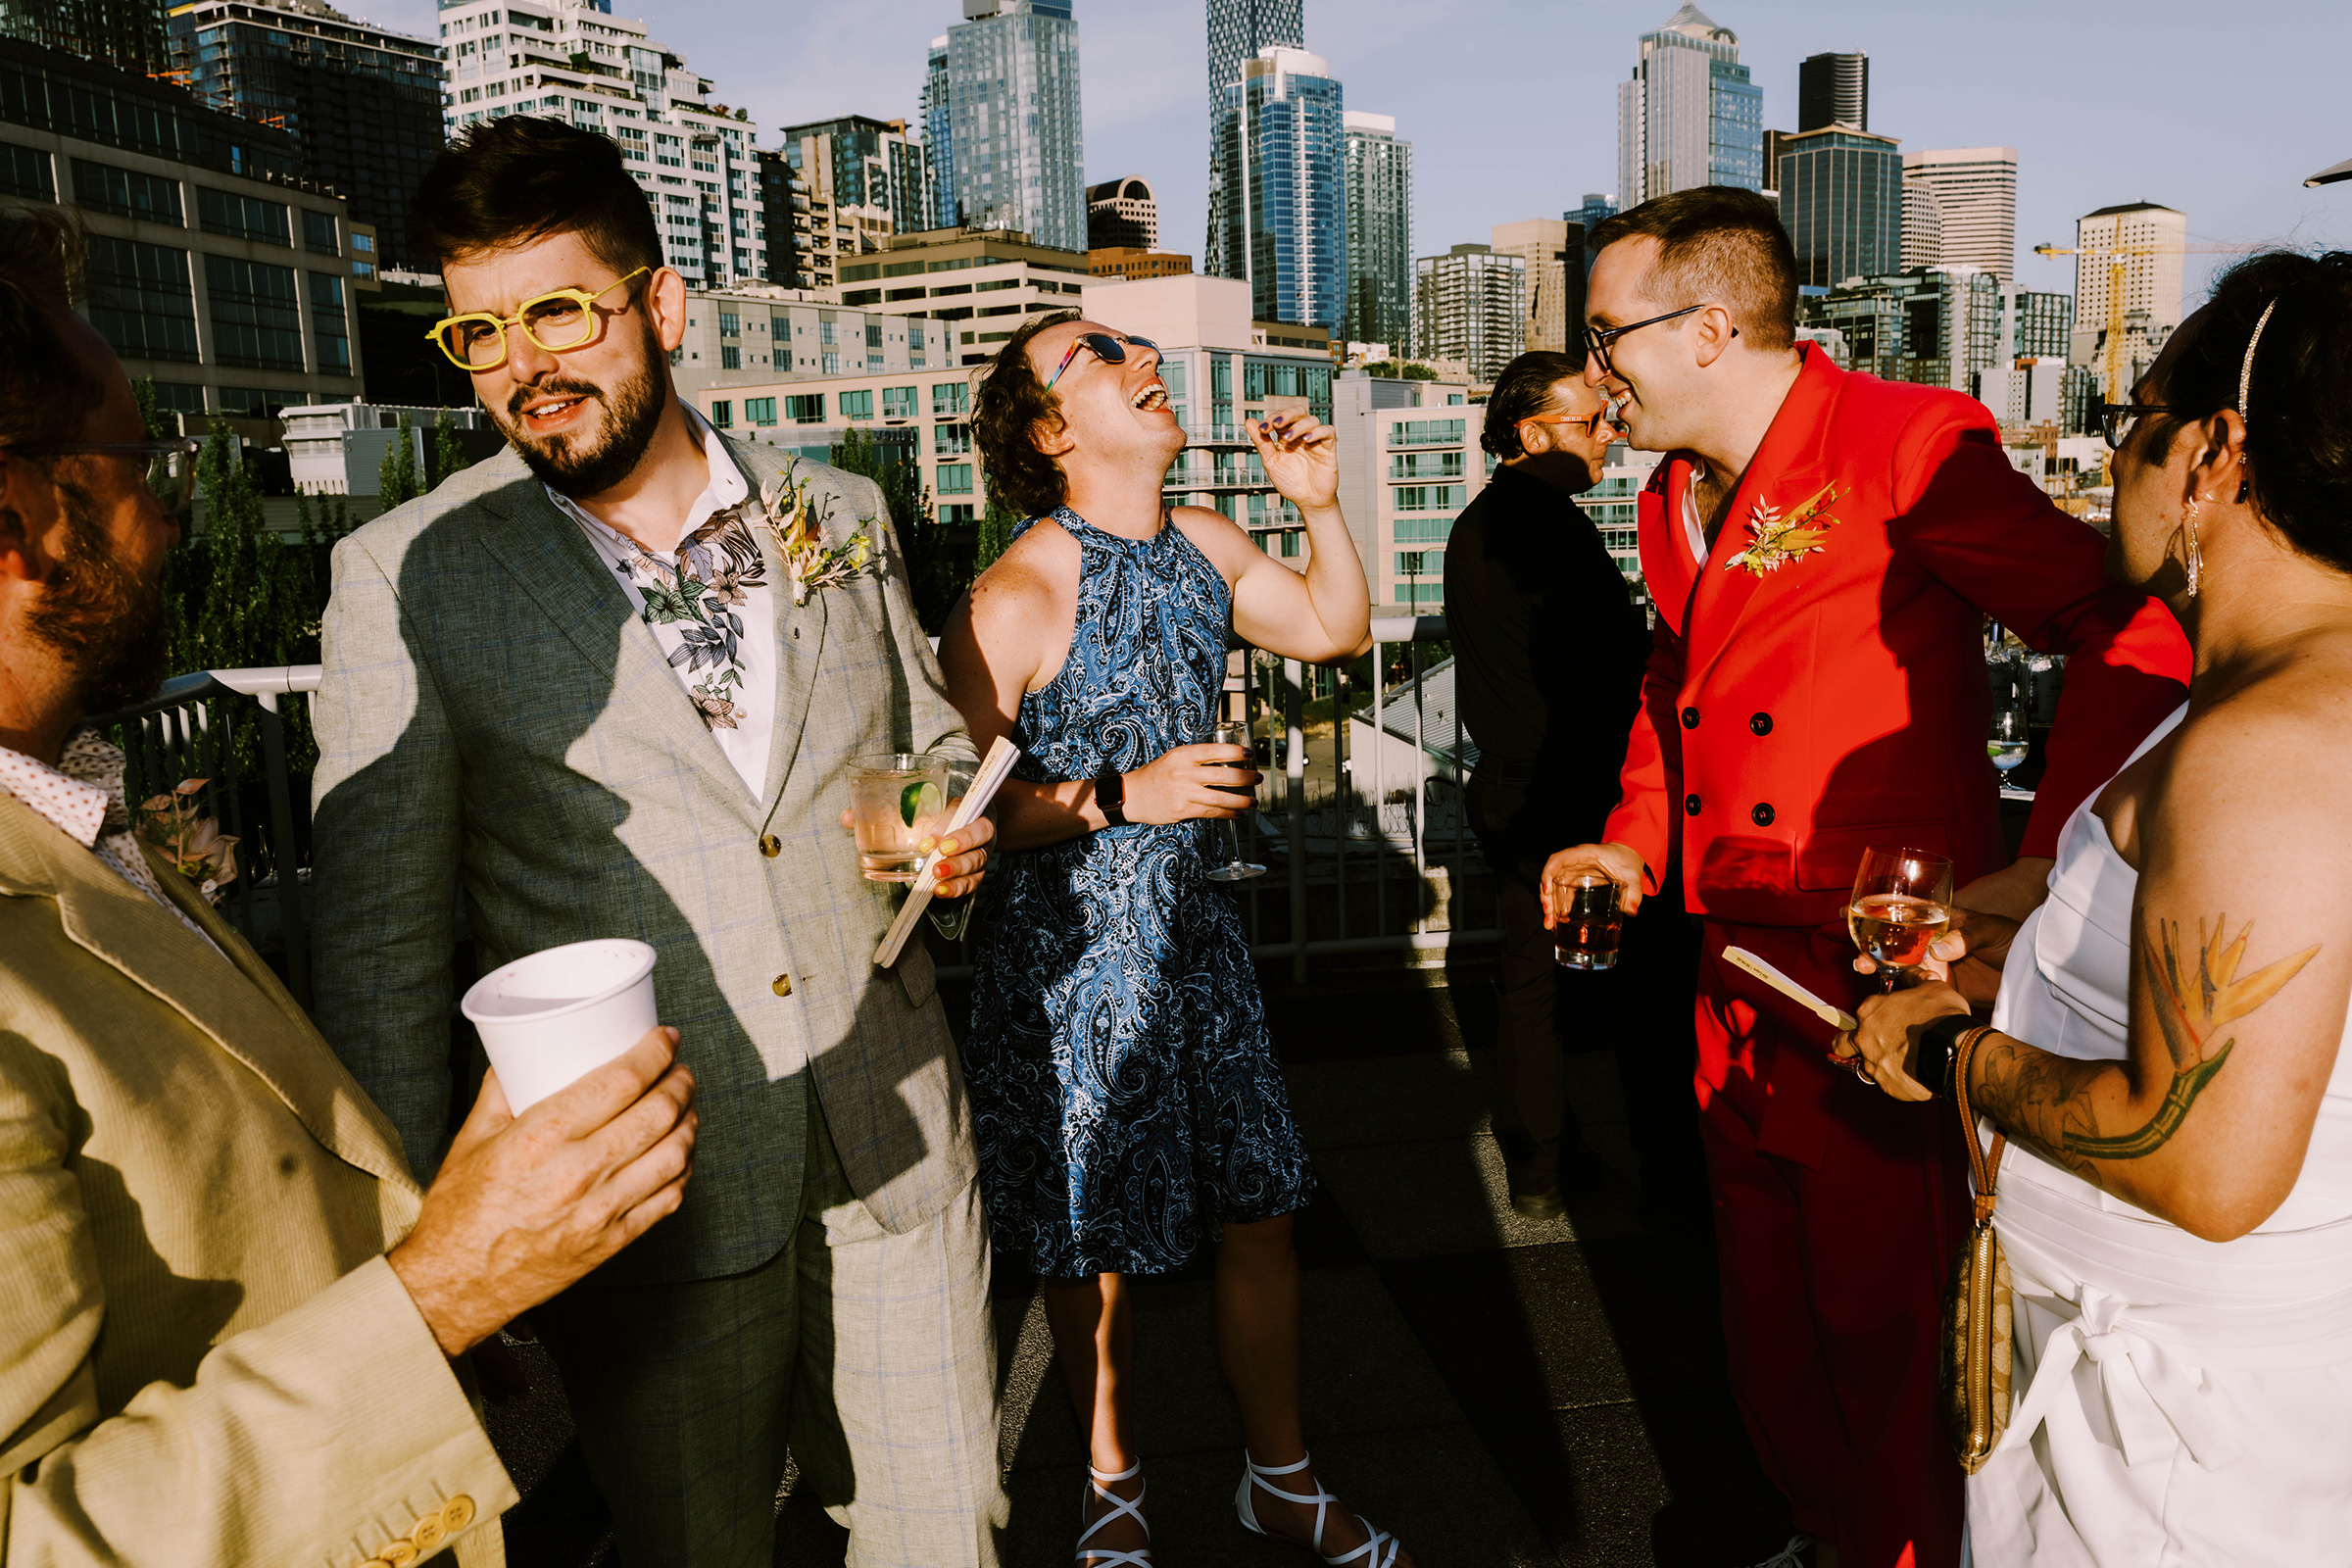 Dustin and Joey's wedding guests enjoying beautiful views on the Bell Harbor Conference Center rooftop, summer 2022